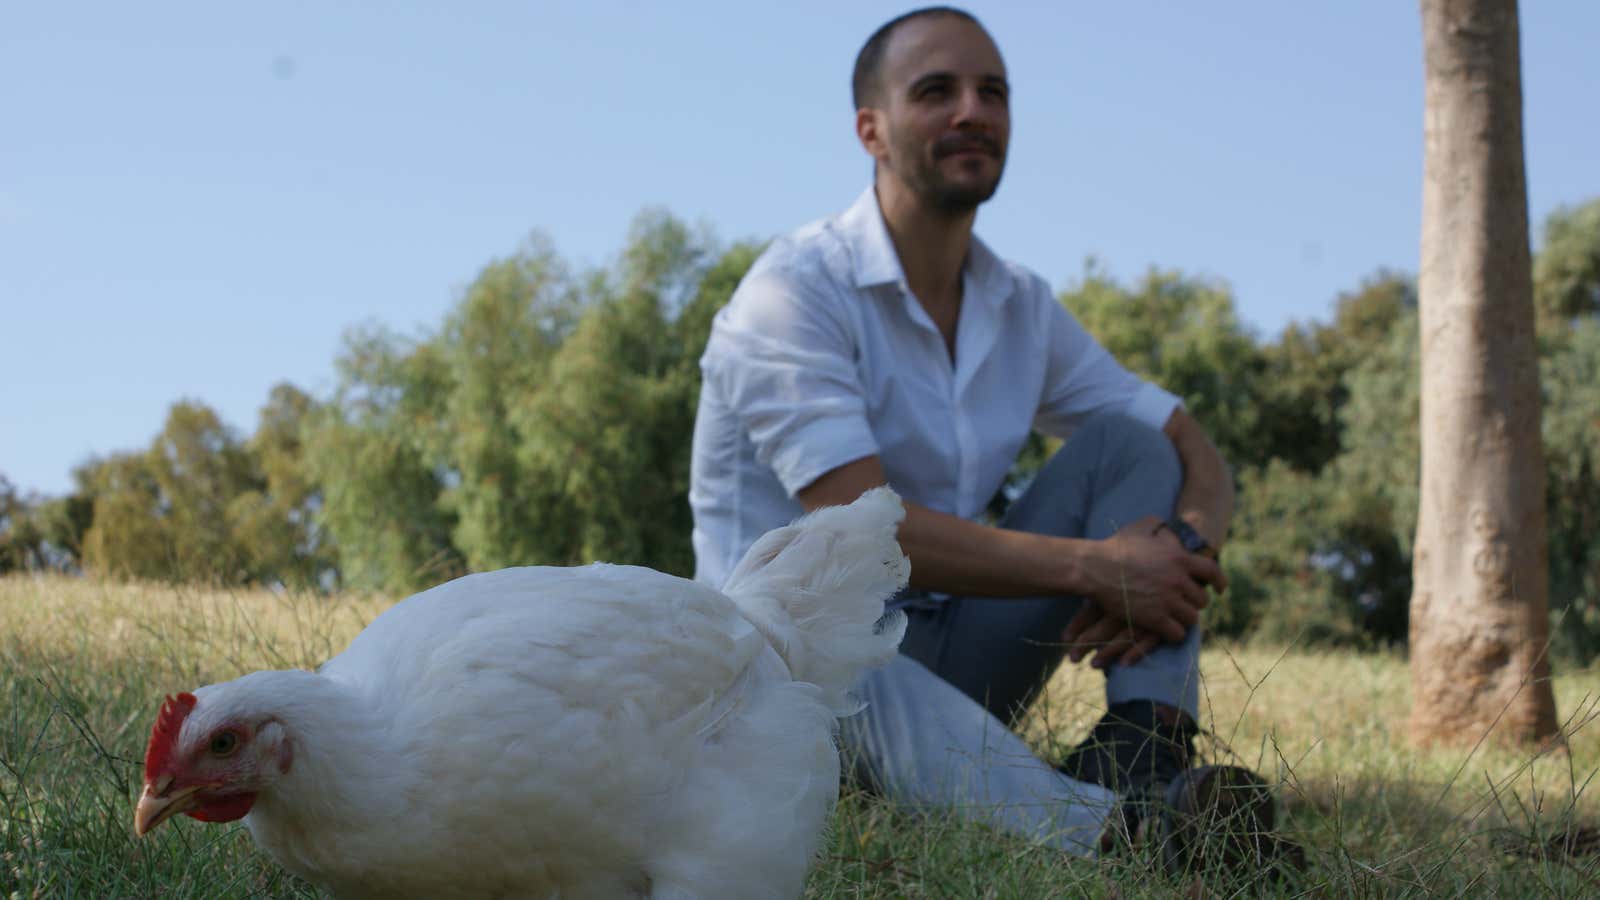 SuperMeat co-founder Ido Savir says creating meat without slaughtering animals is the future of food.